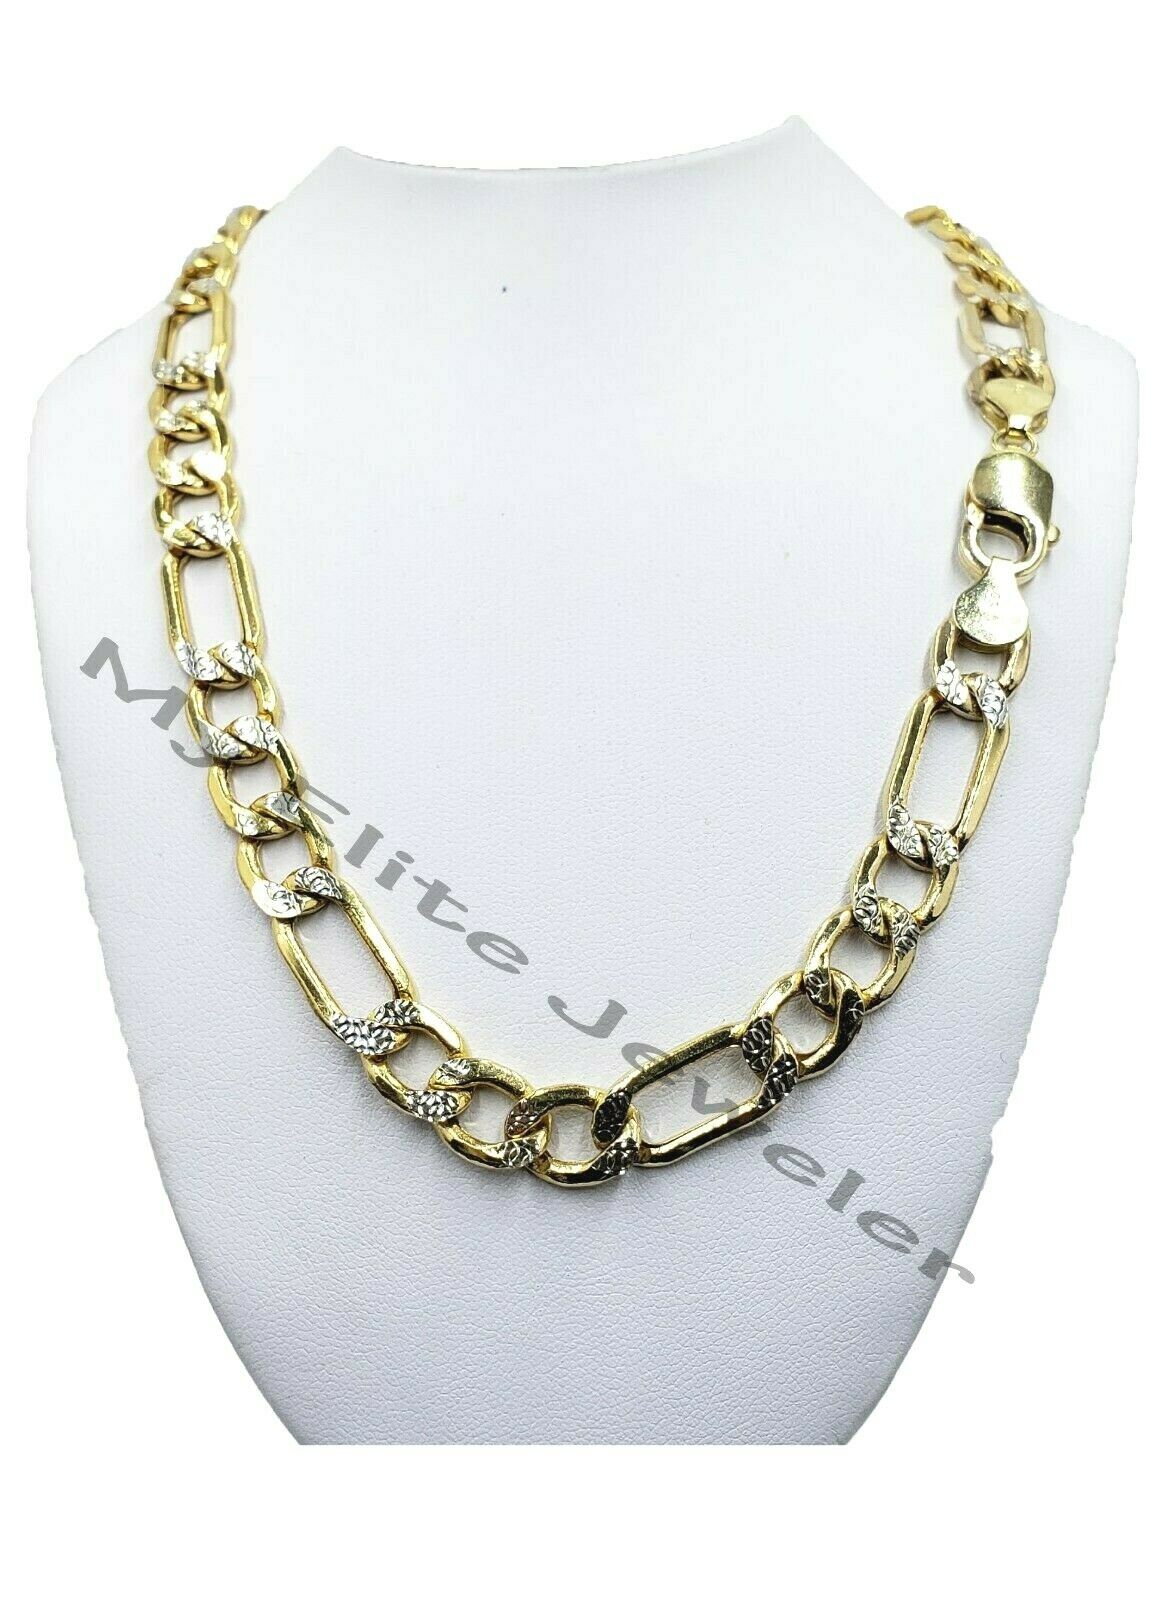 REAL 10k Yellow Gold Figaro Chain Necklace 30 Inch Cuban Link Diamond Cut 8.5 MM